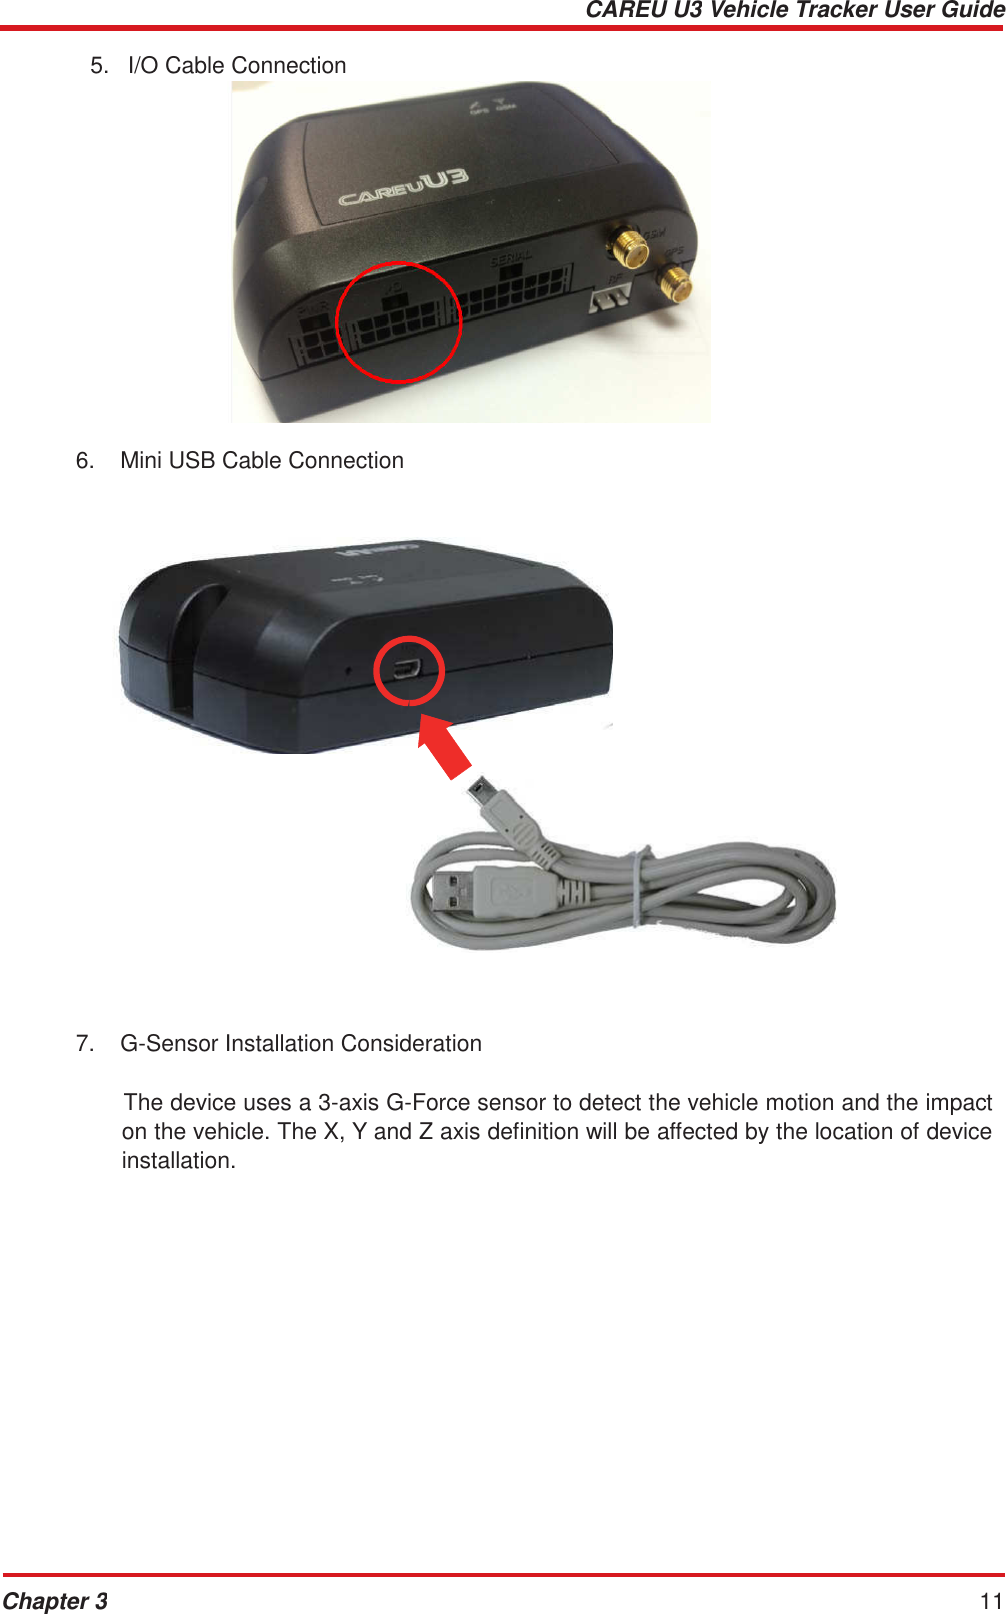 CAREU U3 Vehicle Tracker User Guide Chapter 3 11     5.   I/O Cable Connection                  6.  Mini USB Cable Connection                            7.  G-Sensor Installation Consideration   The device uses a 3-axis G-Force sensor to detect the vehicle motion and the impact on the vehicle. The X, Y and Z axis definition will be affected by the location of device installation. 